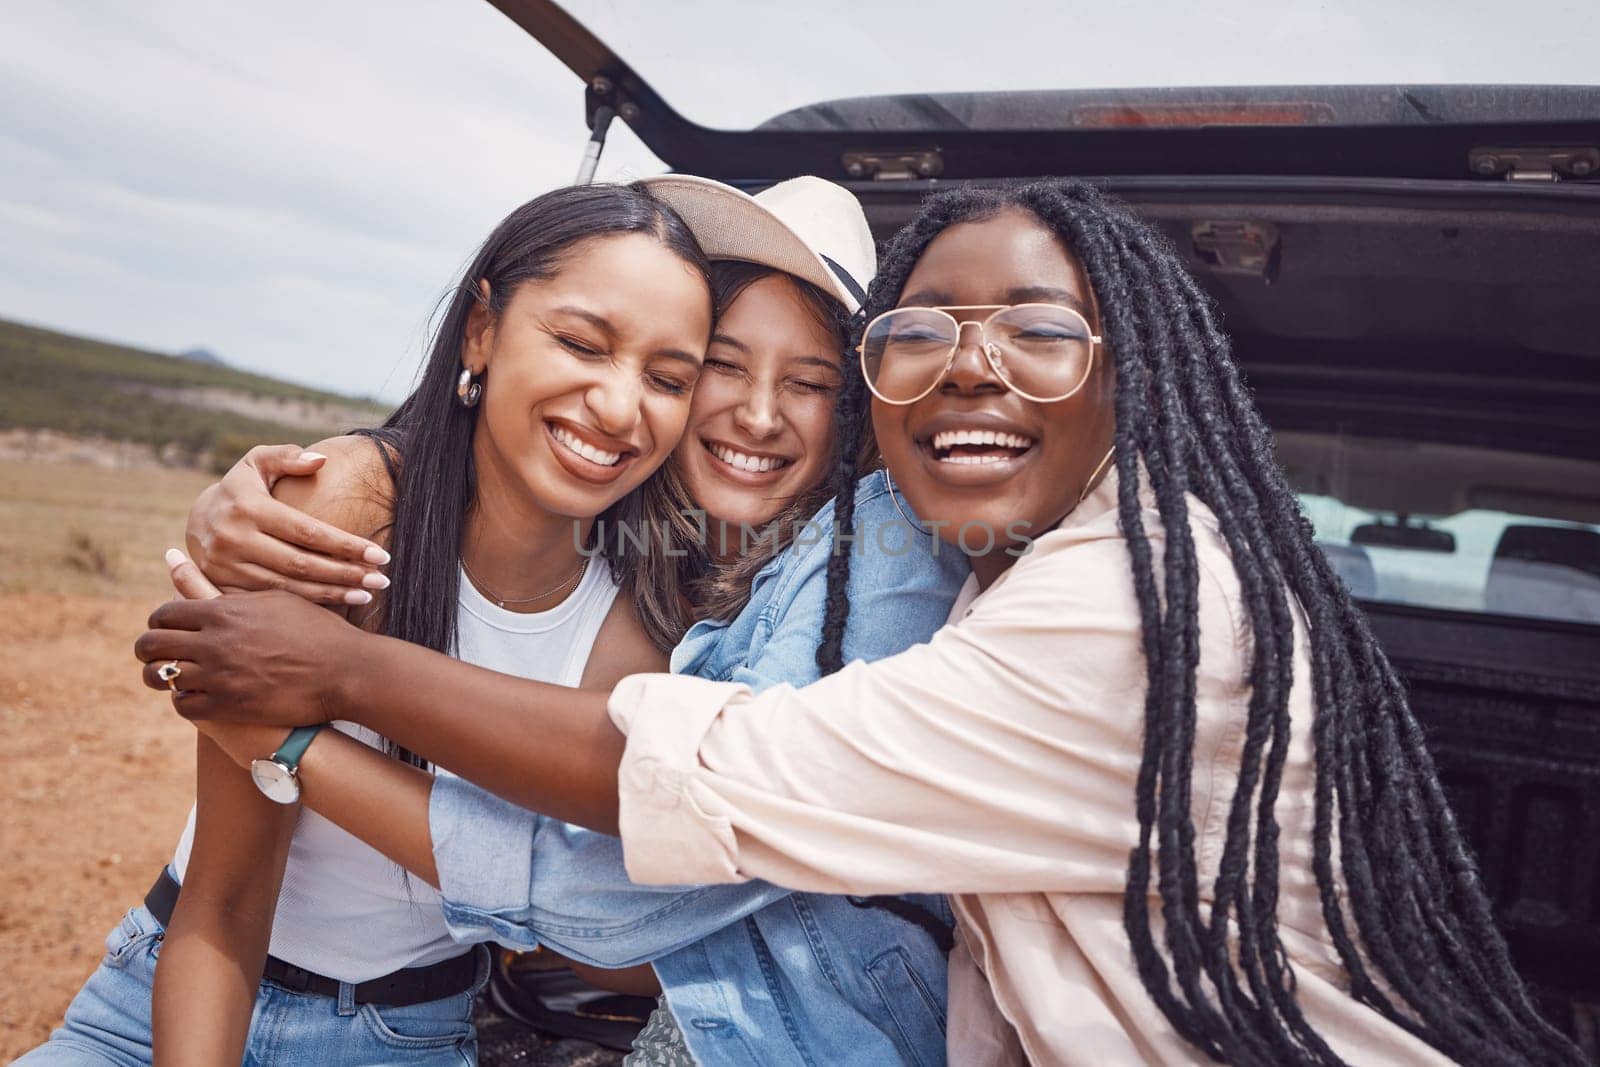 Happy, smile and hug with friends on road trip in countryside for freedom, vacation and summer break. Travel, holiday and bonding with women relax in car for adventure, journey and transportation by YuriArcurs